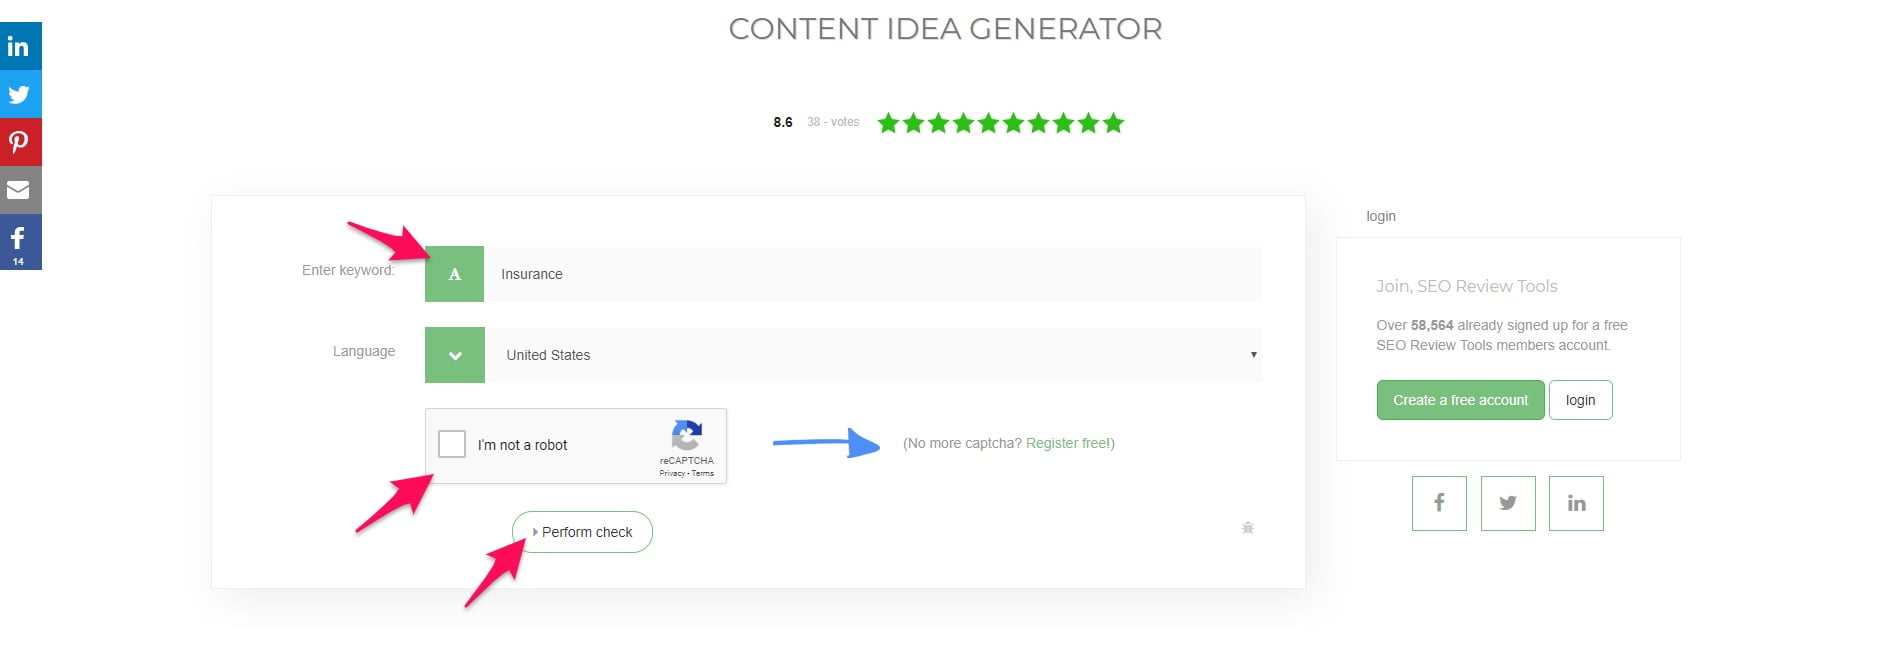 SEO Review Tools content generator home page